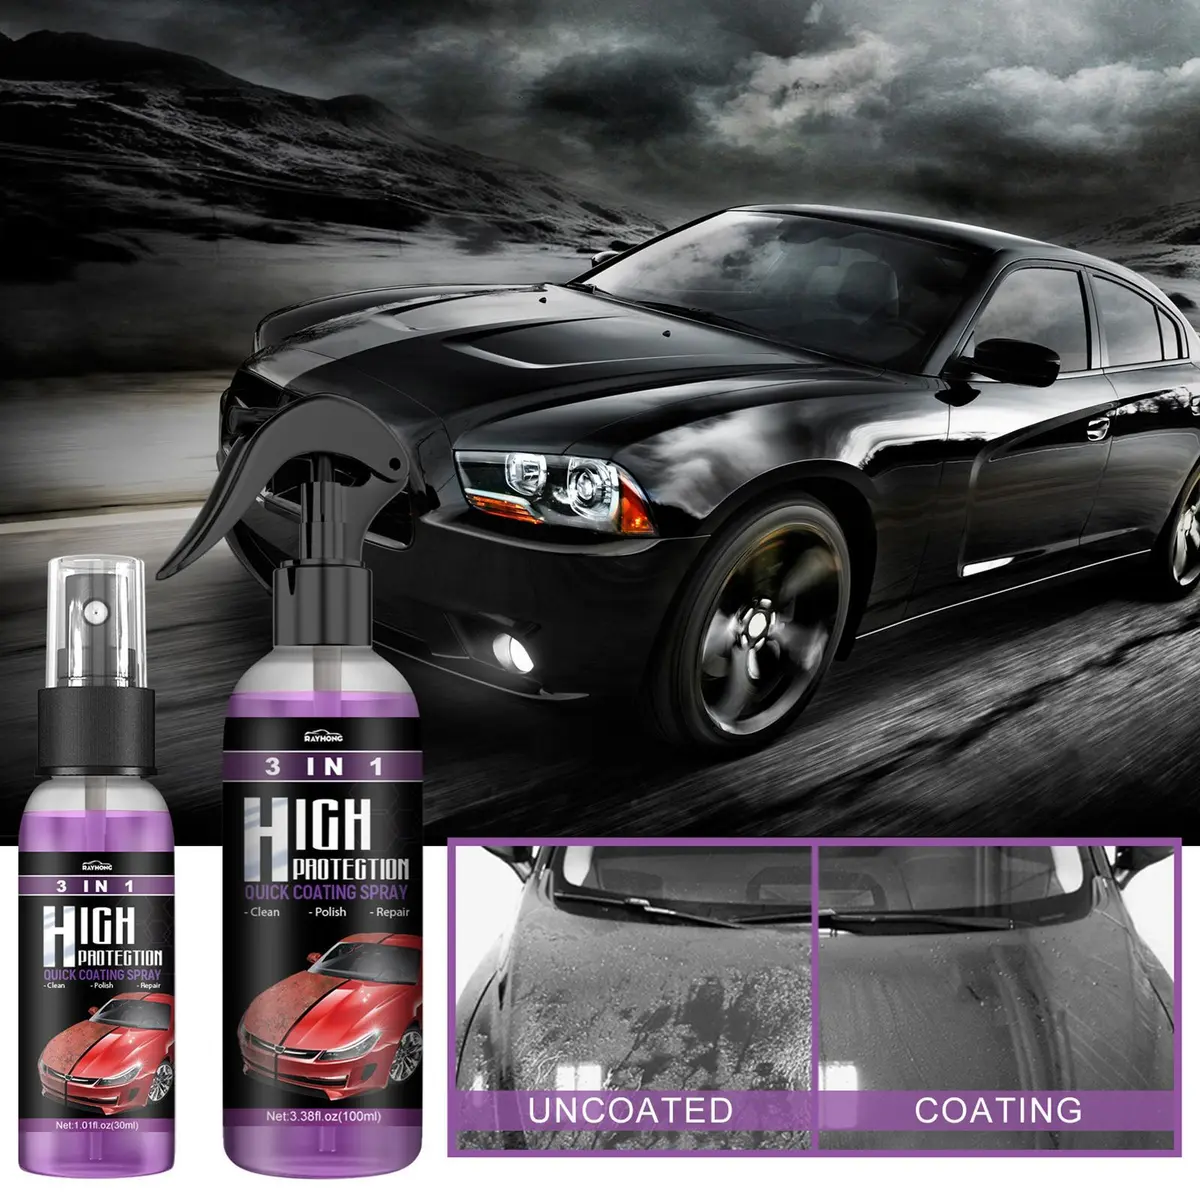 30/100ML 3 in 1 High Protection Quick Car Coat Ceramic Coating Spray  Hydrophobic